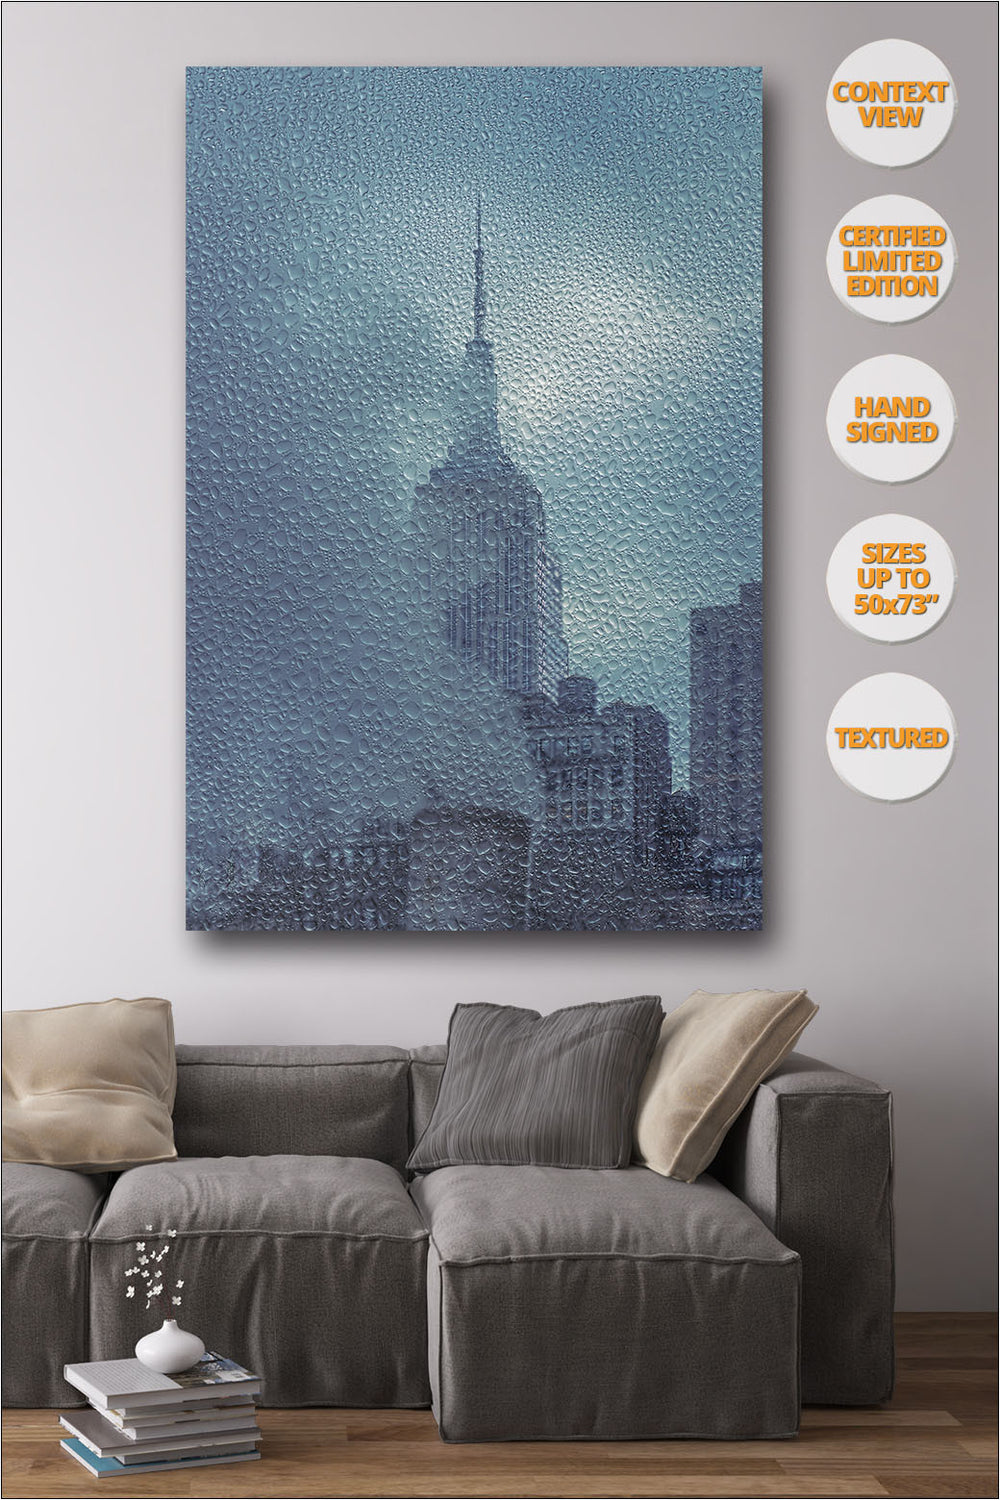 Empire State under the Rain, New York. Series 1/4. | Living room view.